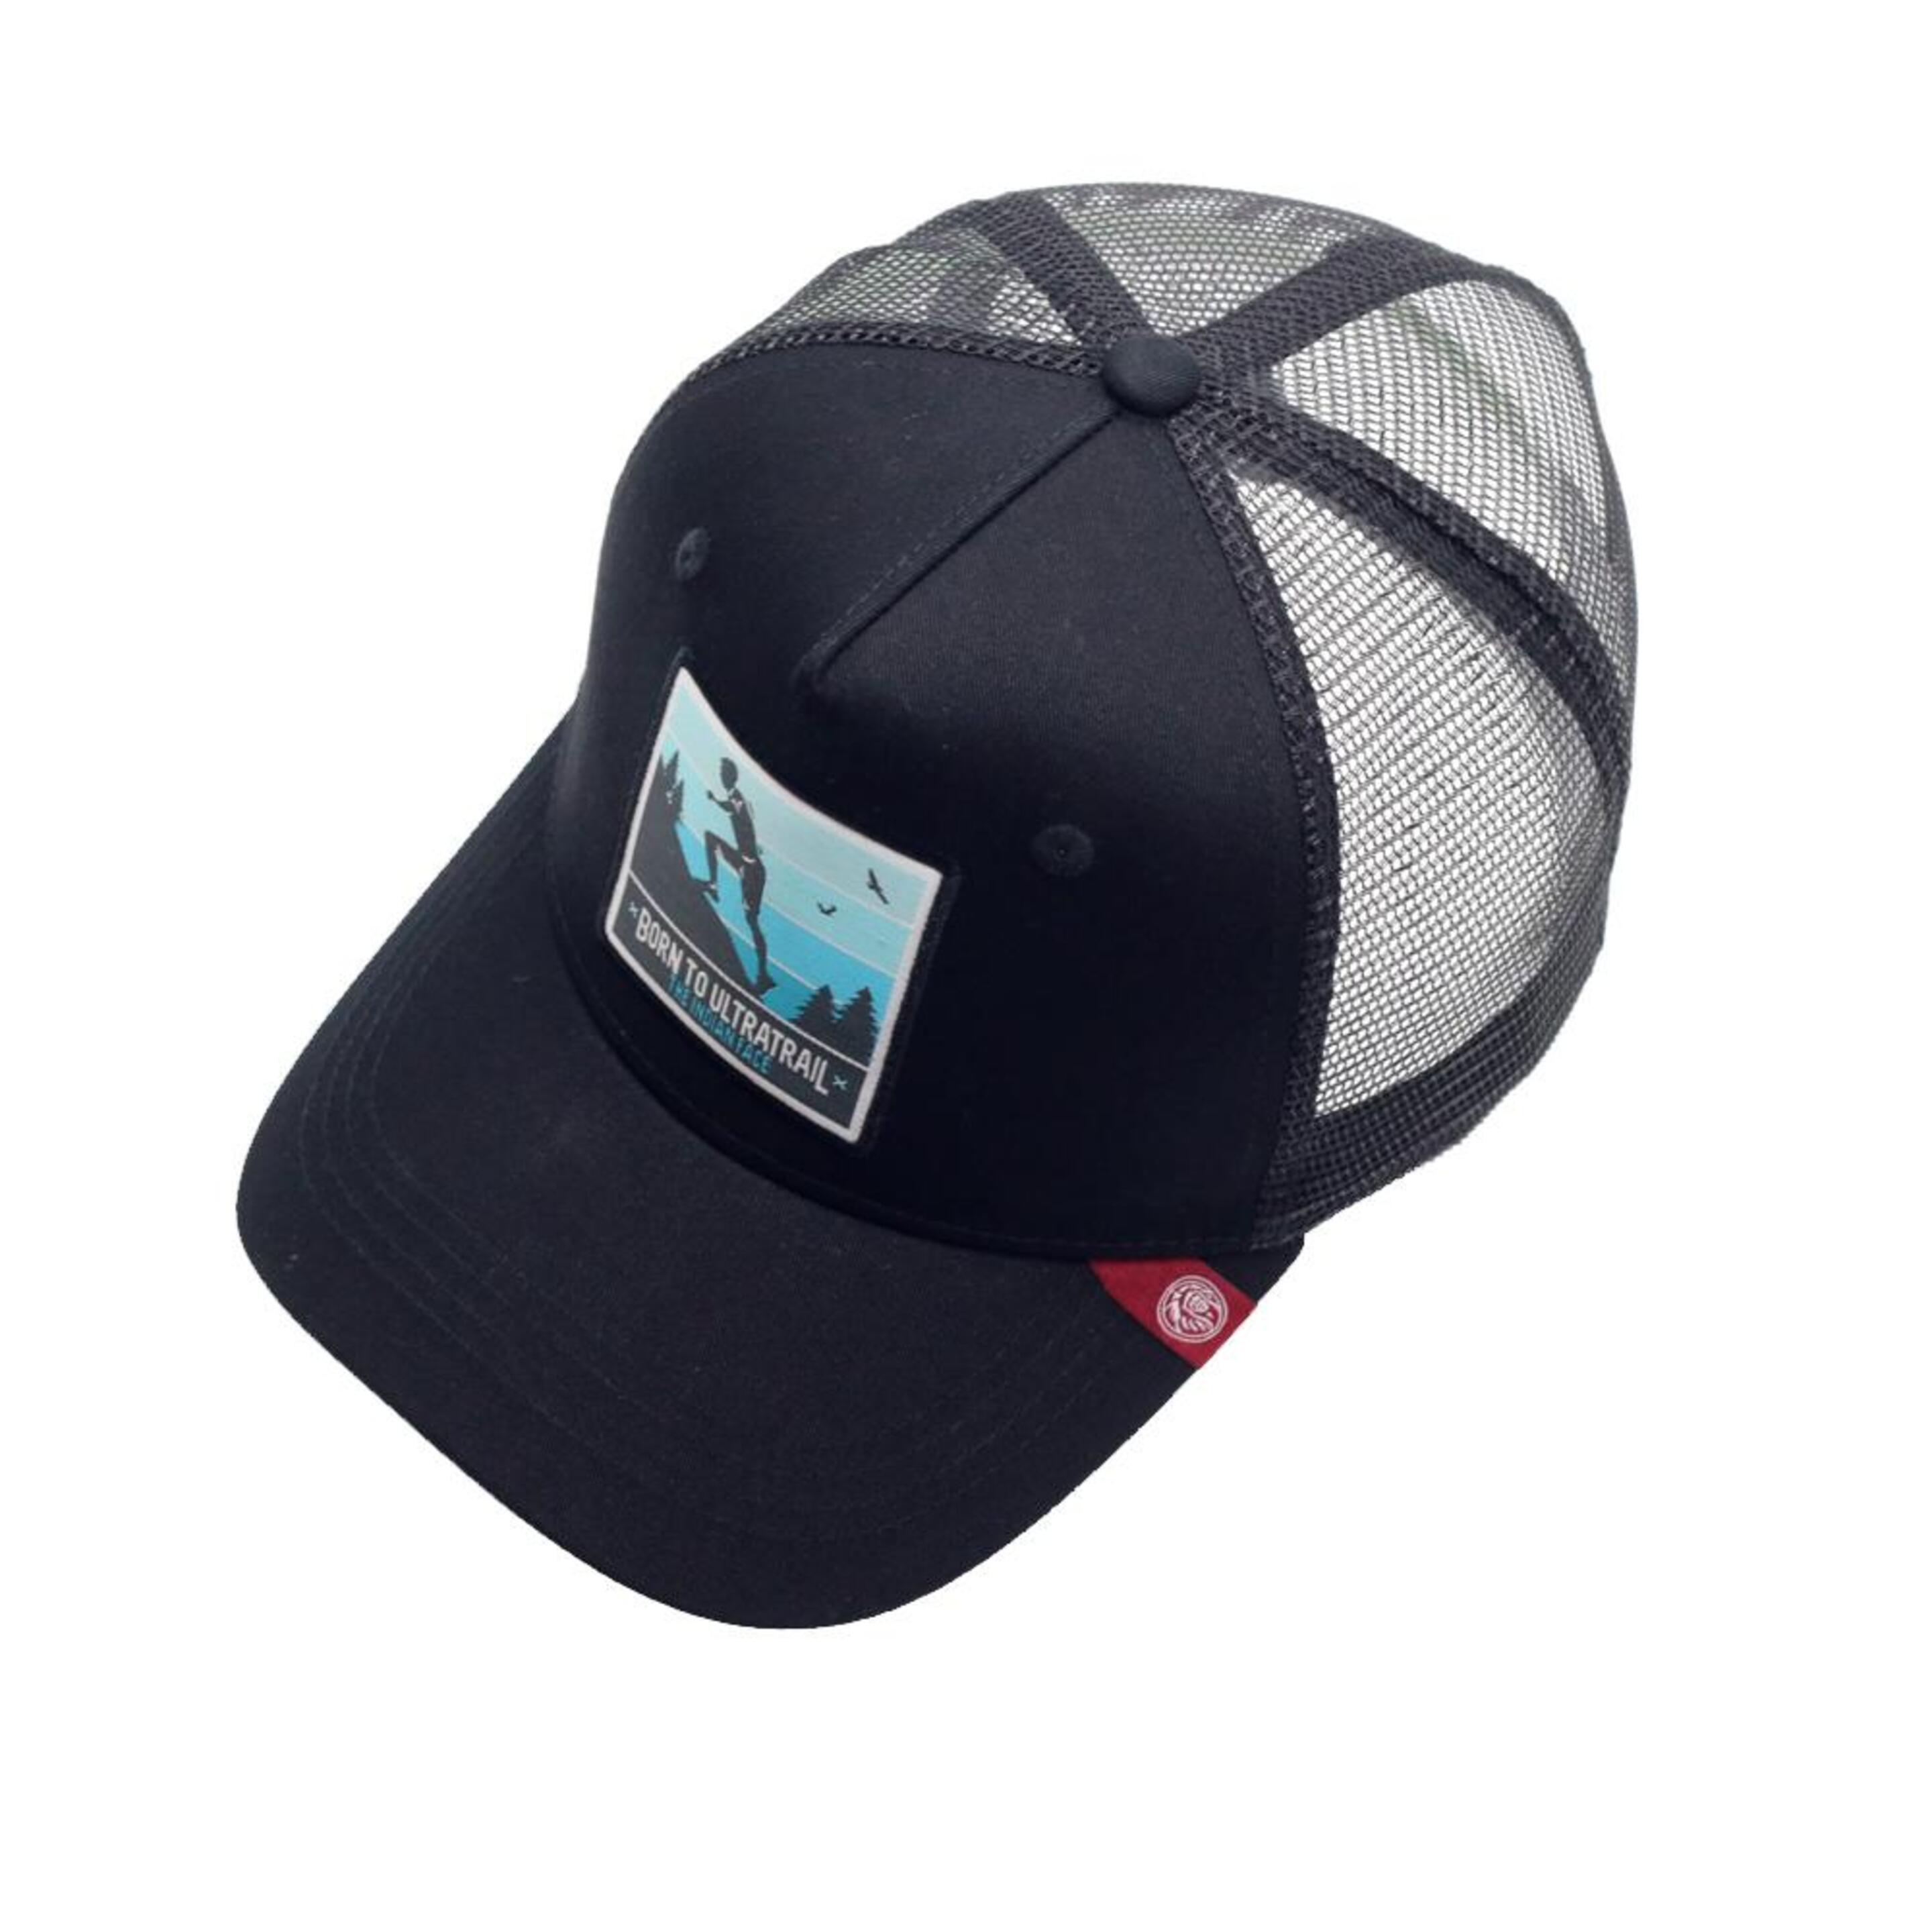 Gorra Trucker Born To Ultratrail Negro The Indian Face Para Hombre Y Mujer